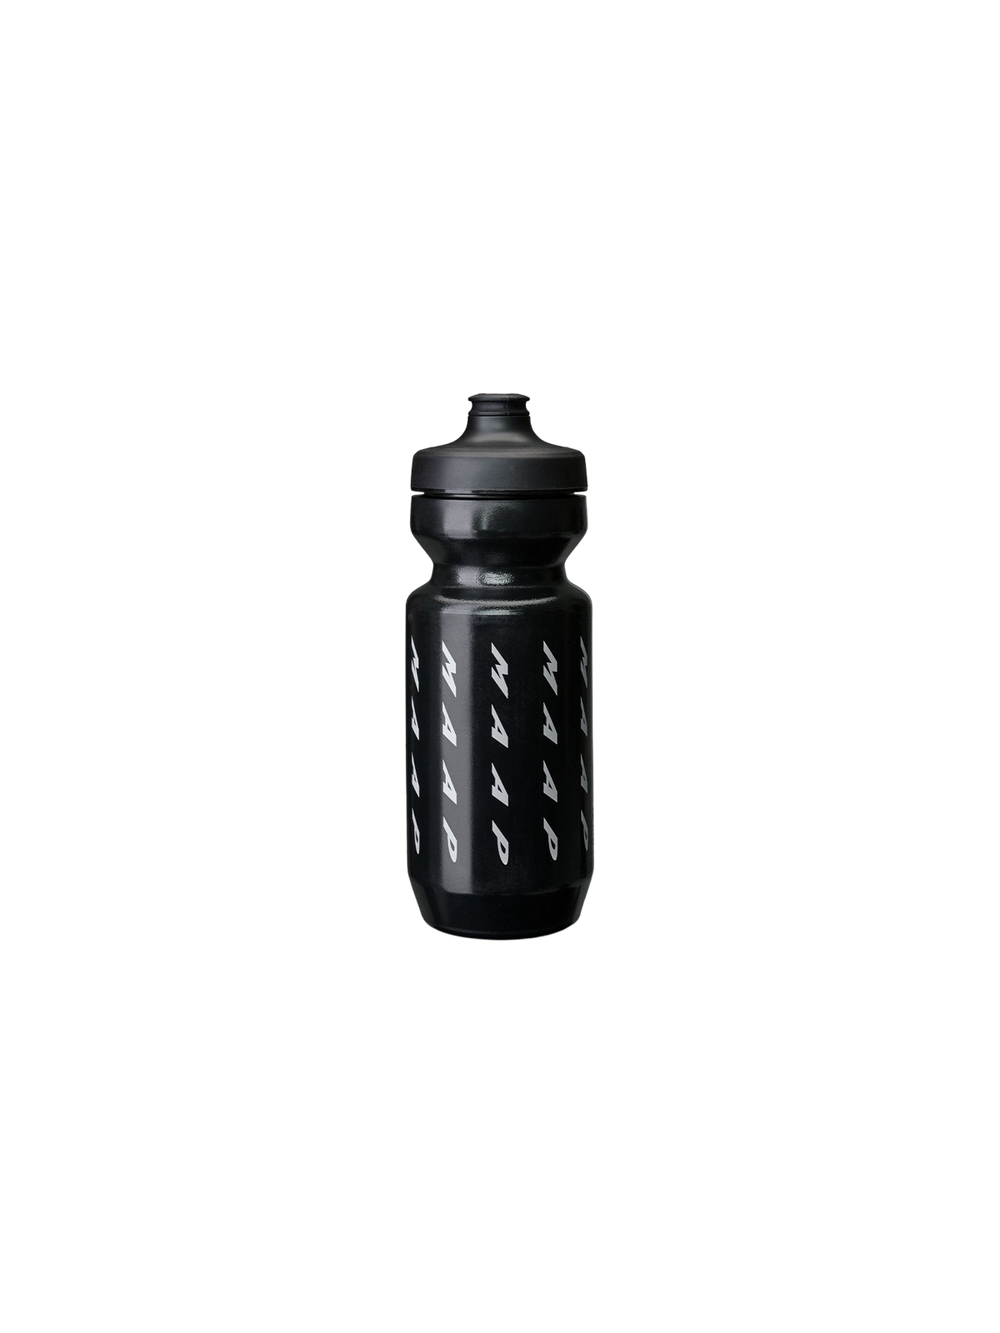 Product Image for Evade Bottle